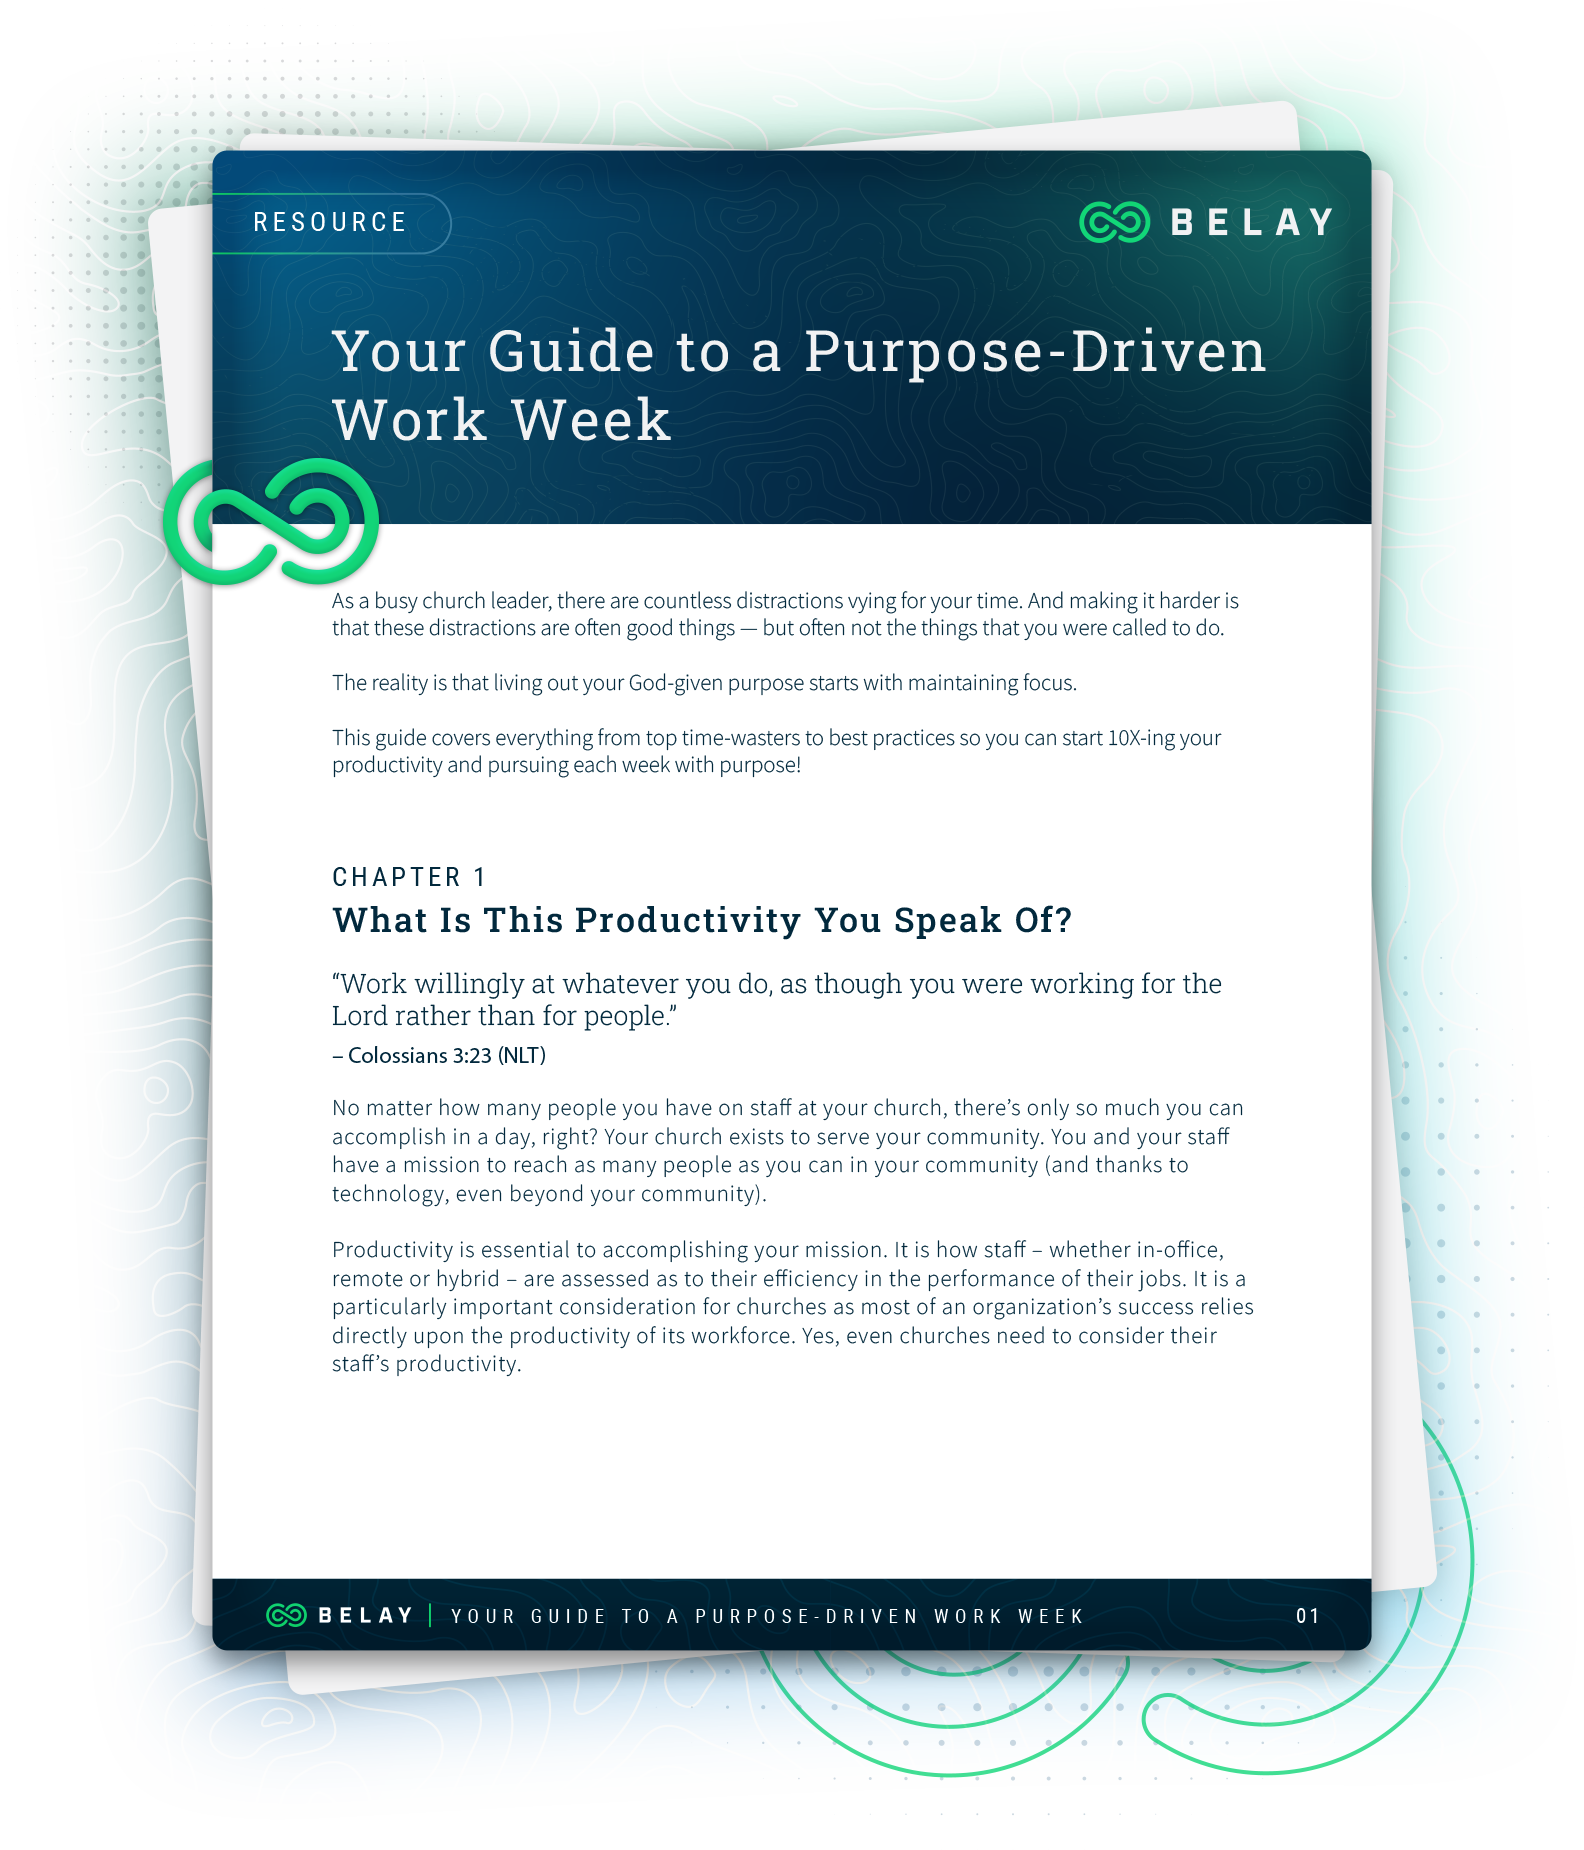 Your Guide to a Purpose-Driven Work Week